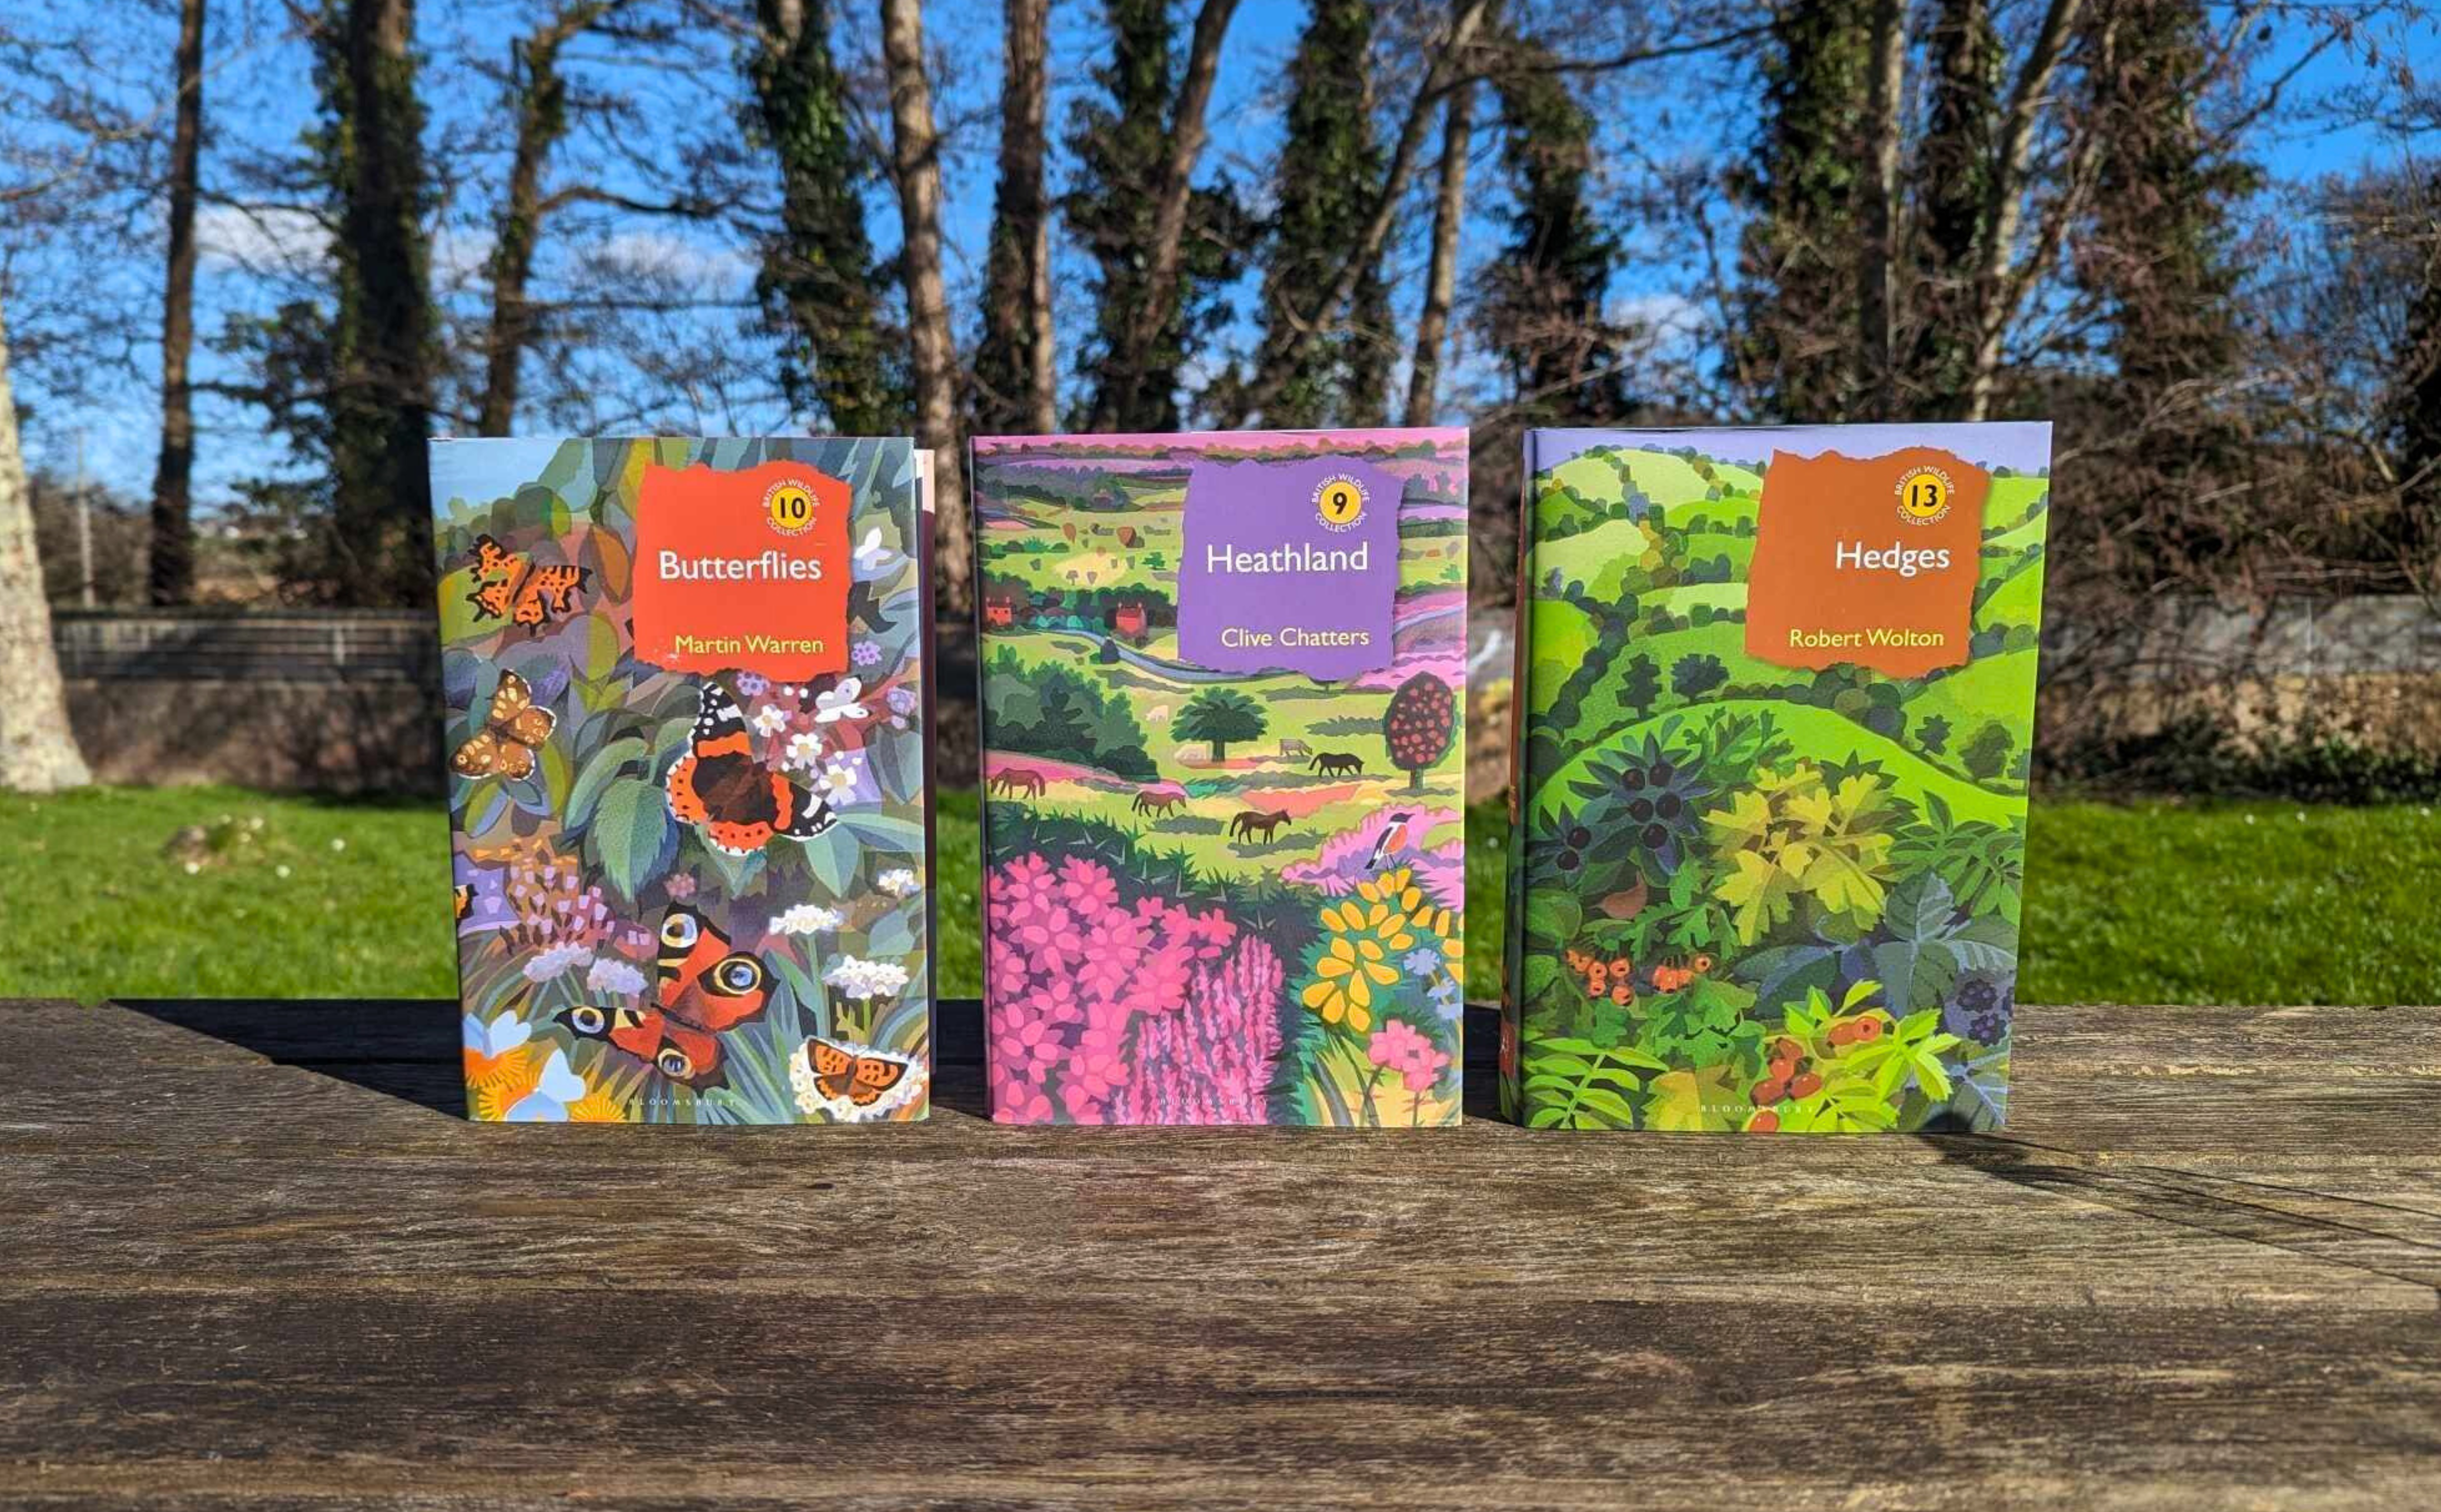 Photograph of three British Wildlife books - Butterflies, Meadows and Hedges, stood in a line on a wooden bench with trees, grass and blue skies behind.